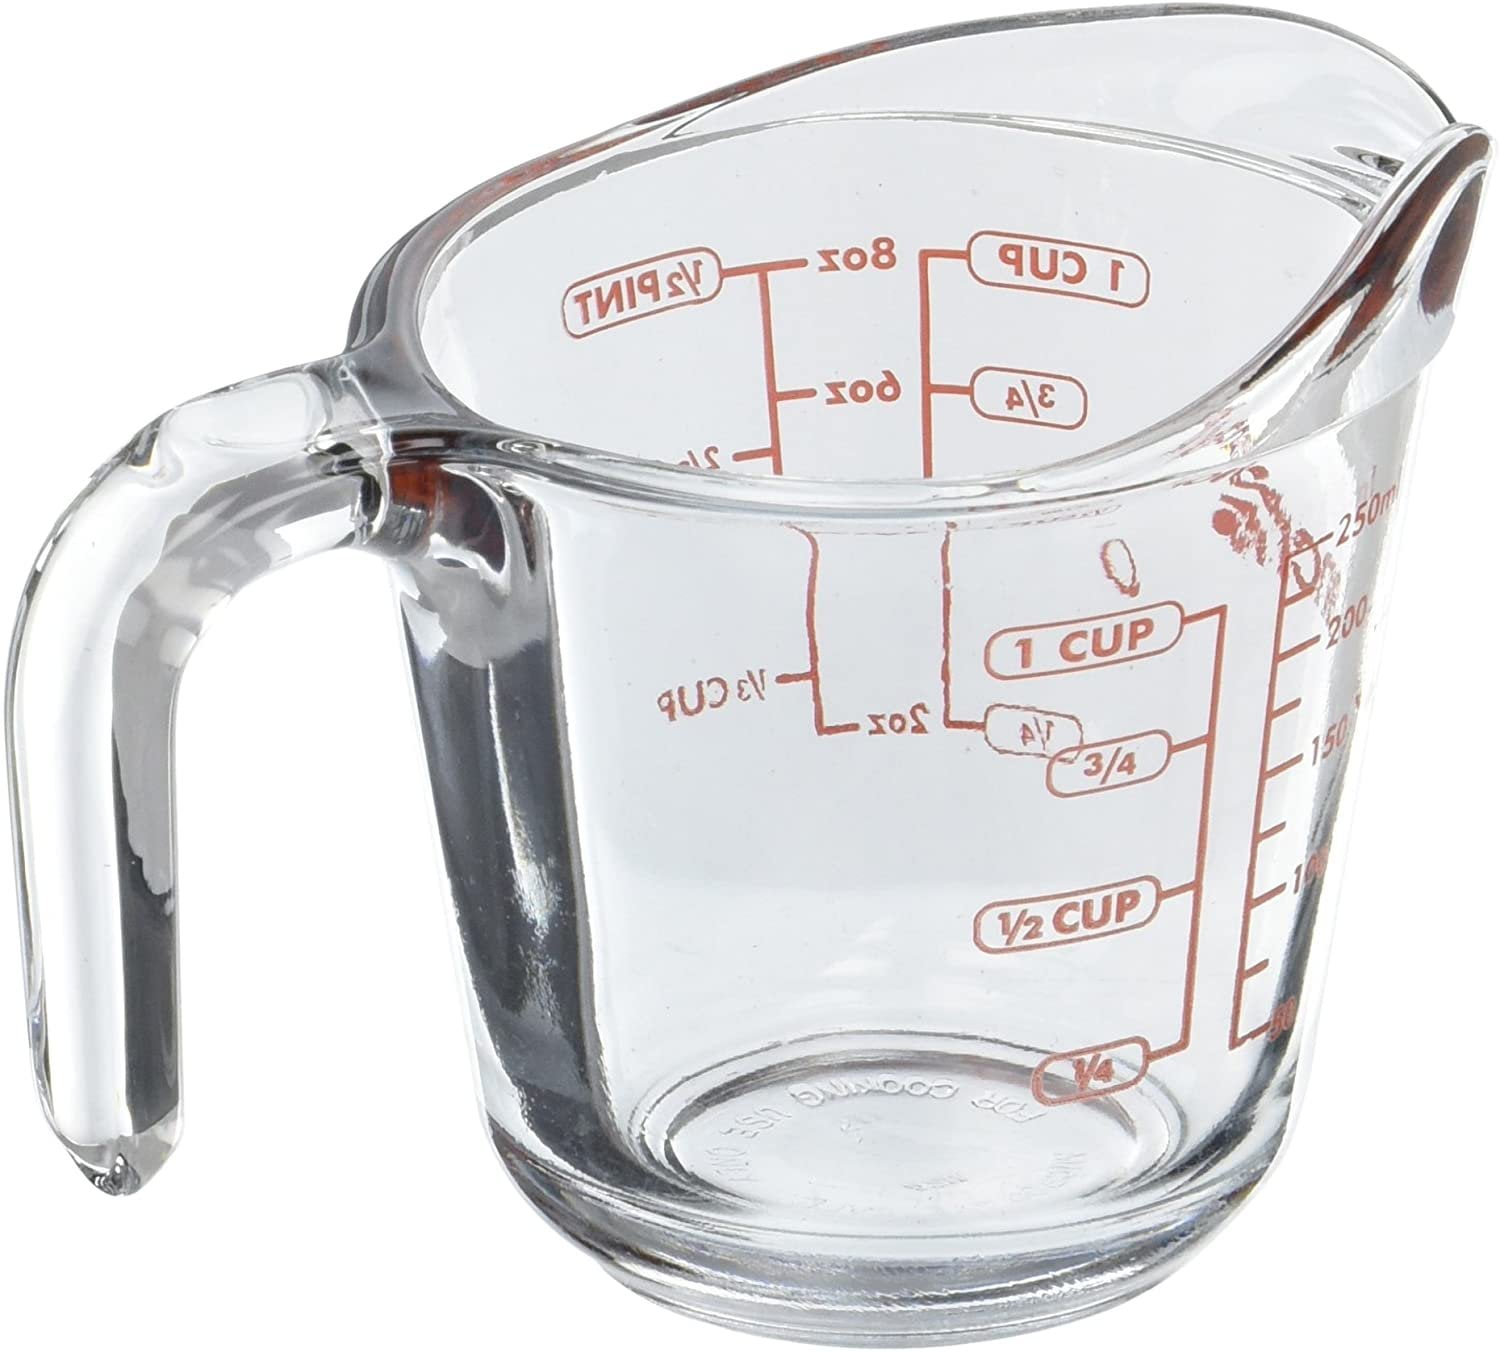  Anchor Hocking 8-ounce Triple Pour Measuring Cup